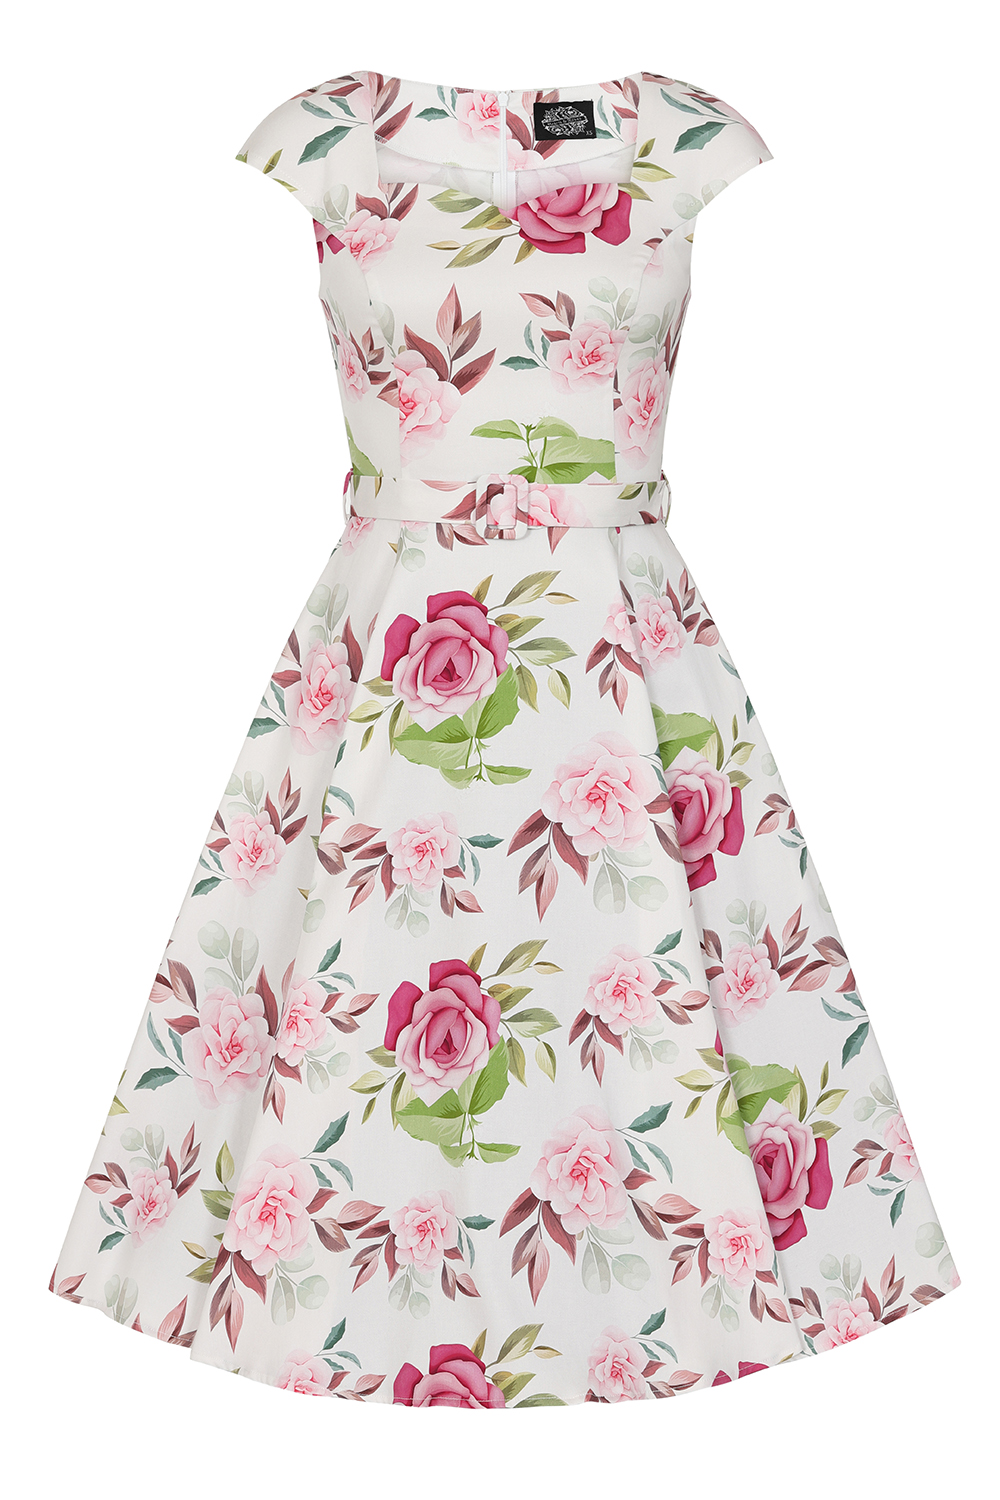 Lexi Floral Swing Dress - Hearts & Roses London